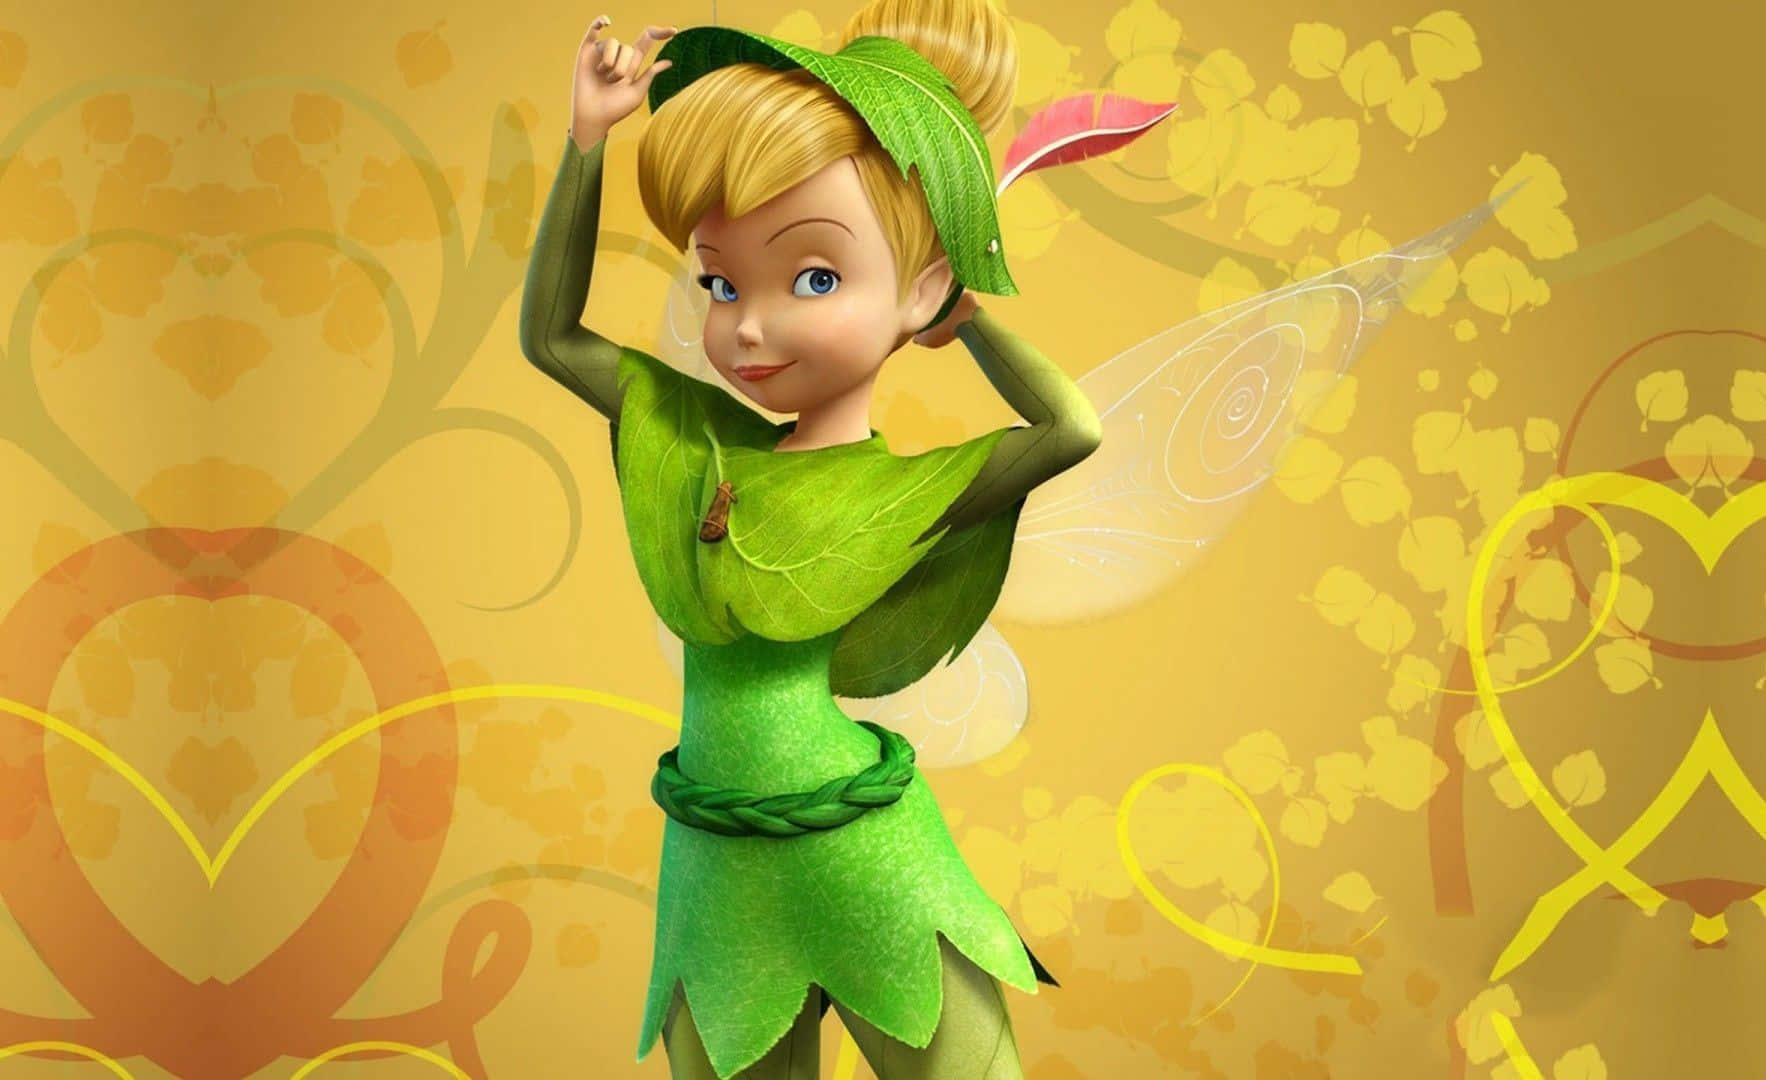 Enchanting Tinkerbell with a Magical Touch